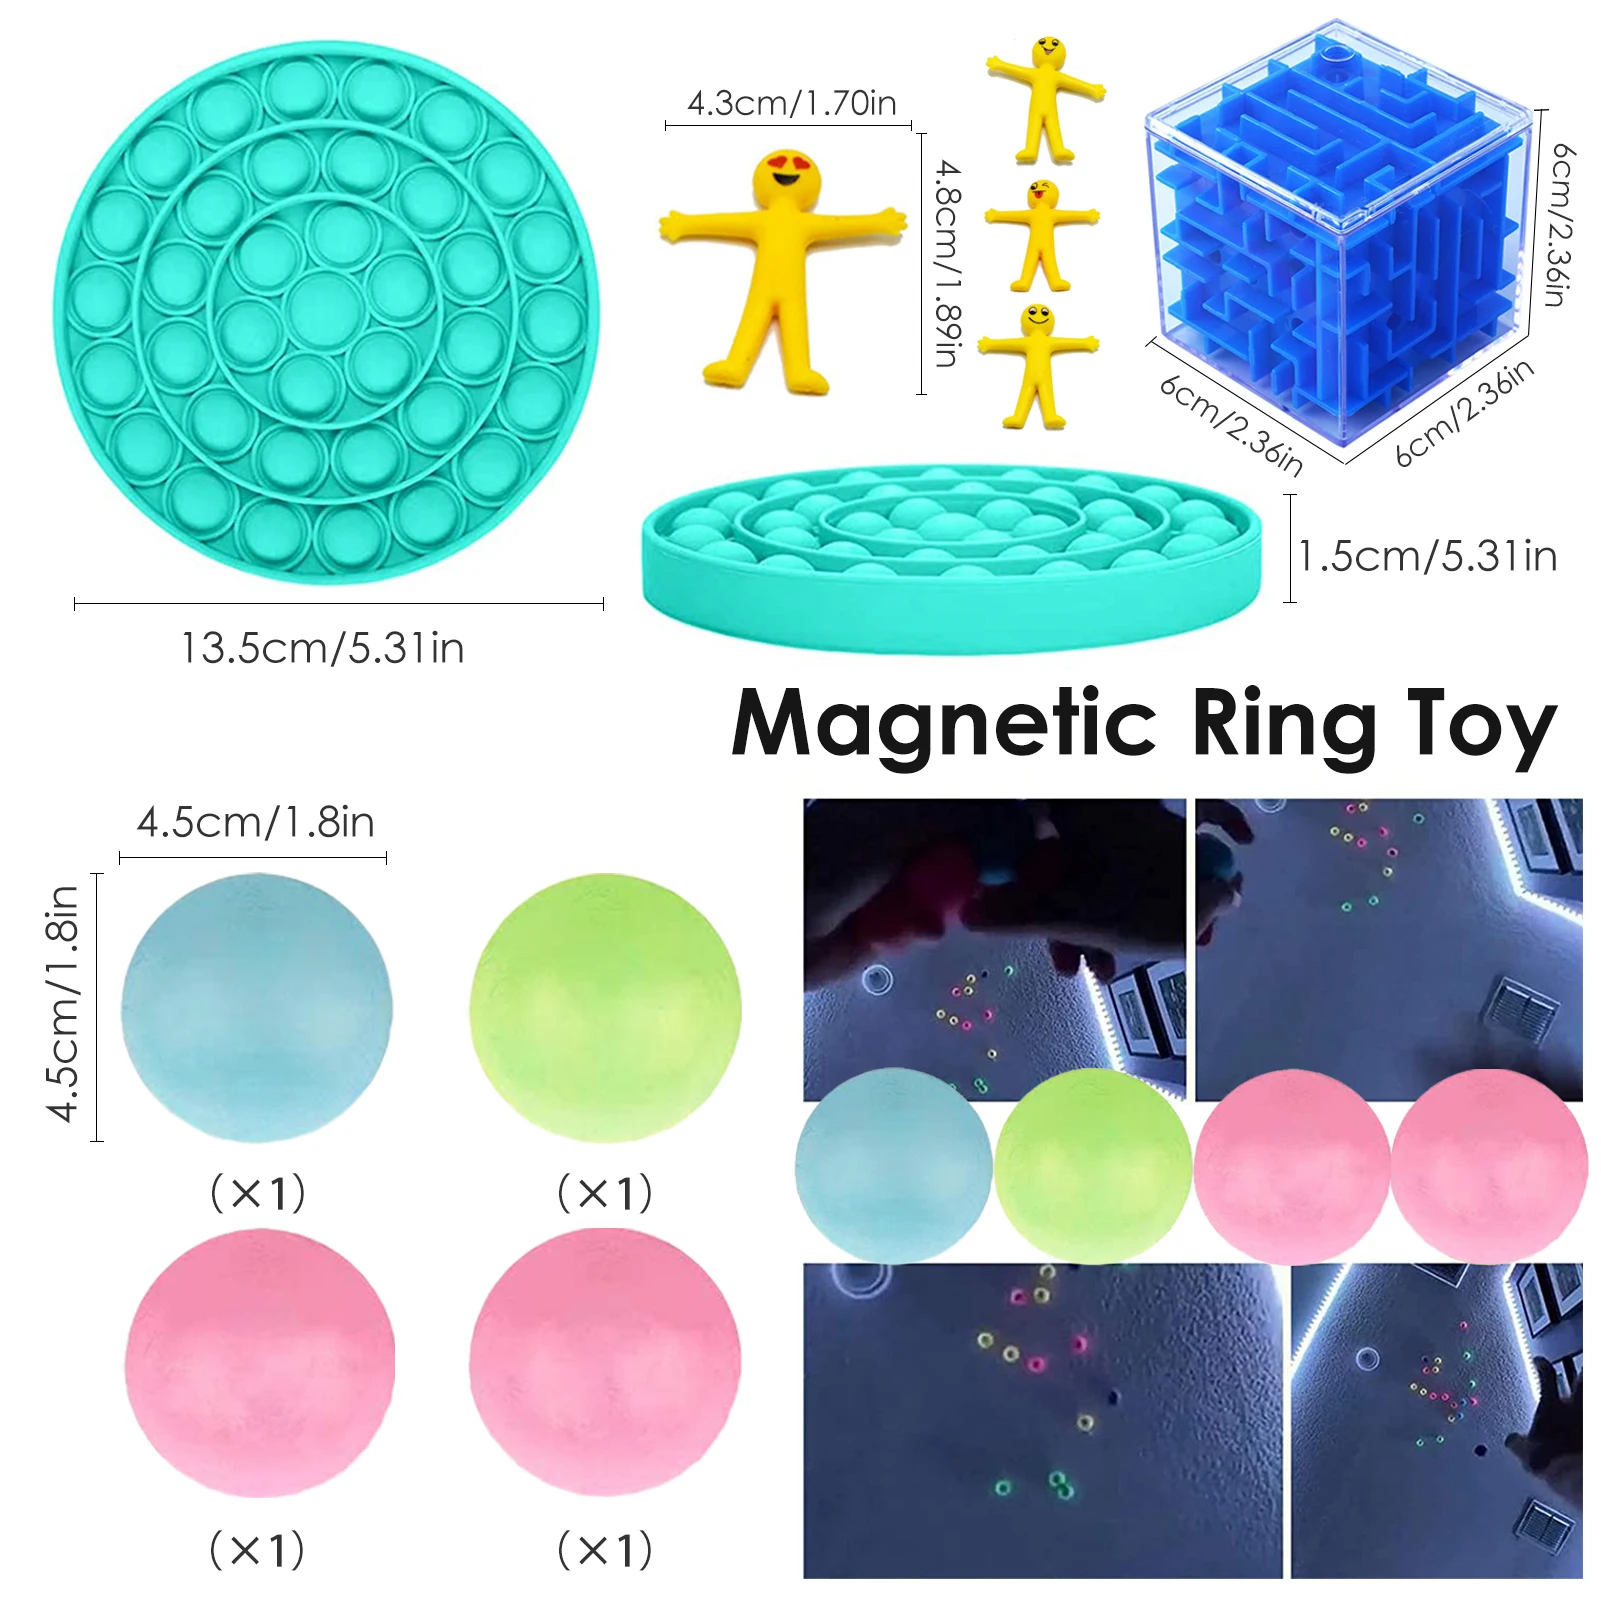 

NEWEST Fidget Toys Sensory Pop Toy Antistress Simple Dimple Anti-stress Pack Stress Reliever Calming Hand Toys For Kids Adults